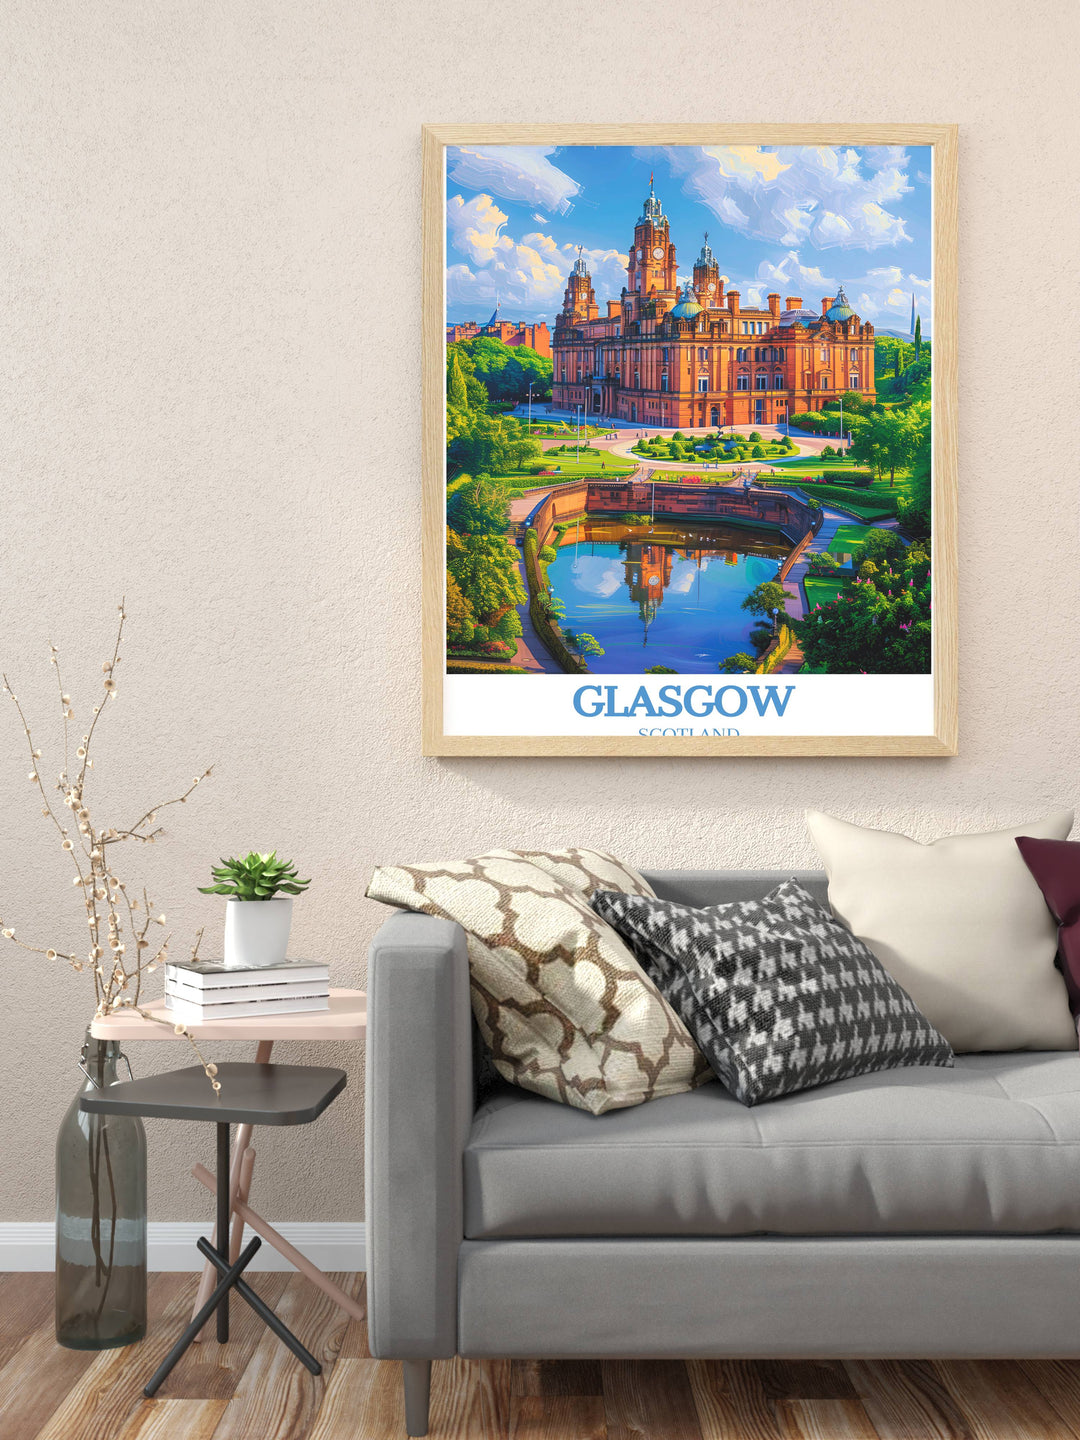 Embrace the beauty of Scotland with our Glasgow poster collection, featuring exquisite details of the citys landscape, a must-have for those curating their Glasgow wall art and travel print collections.